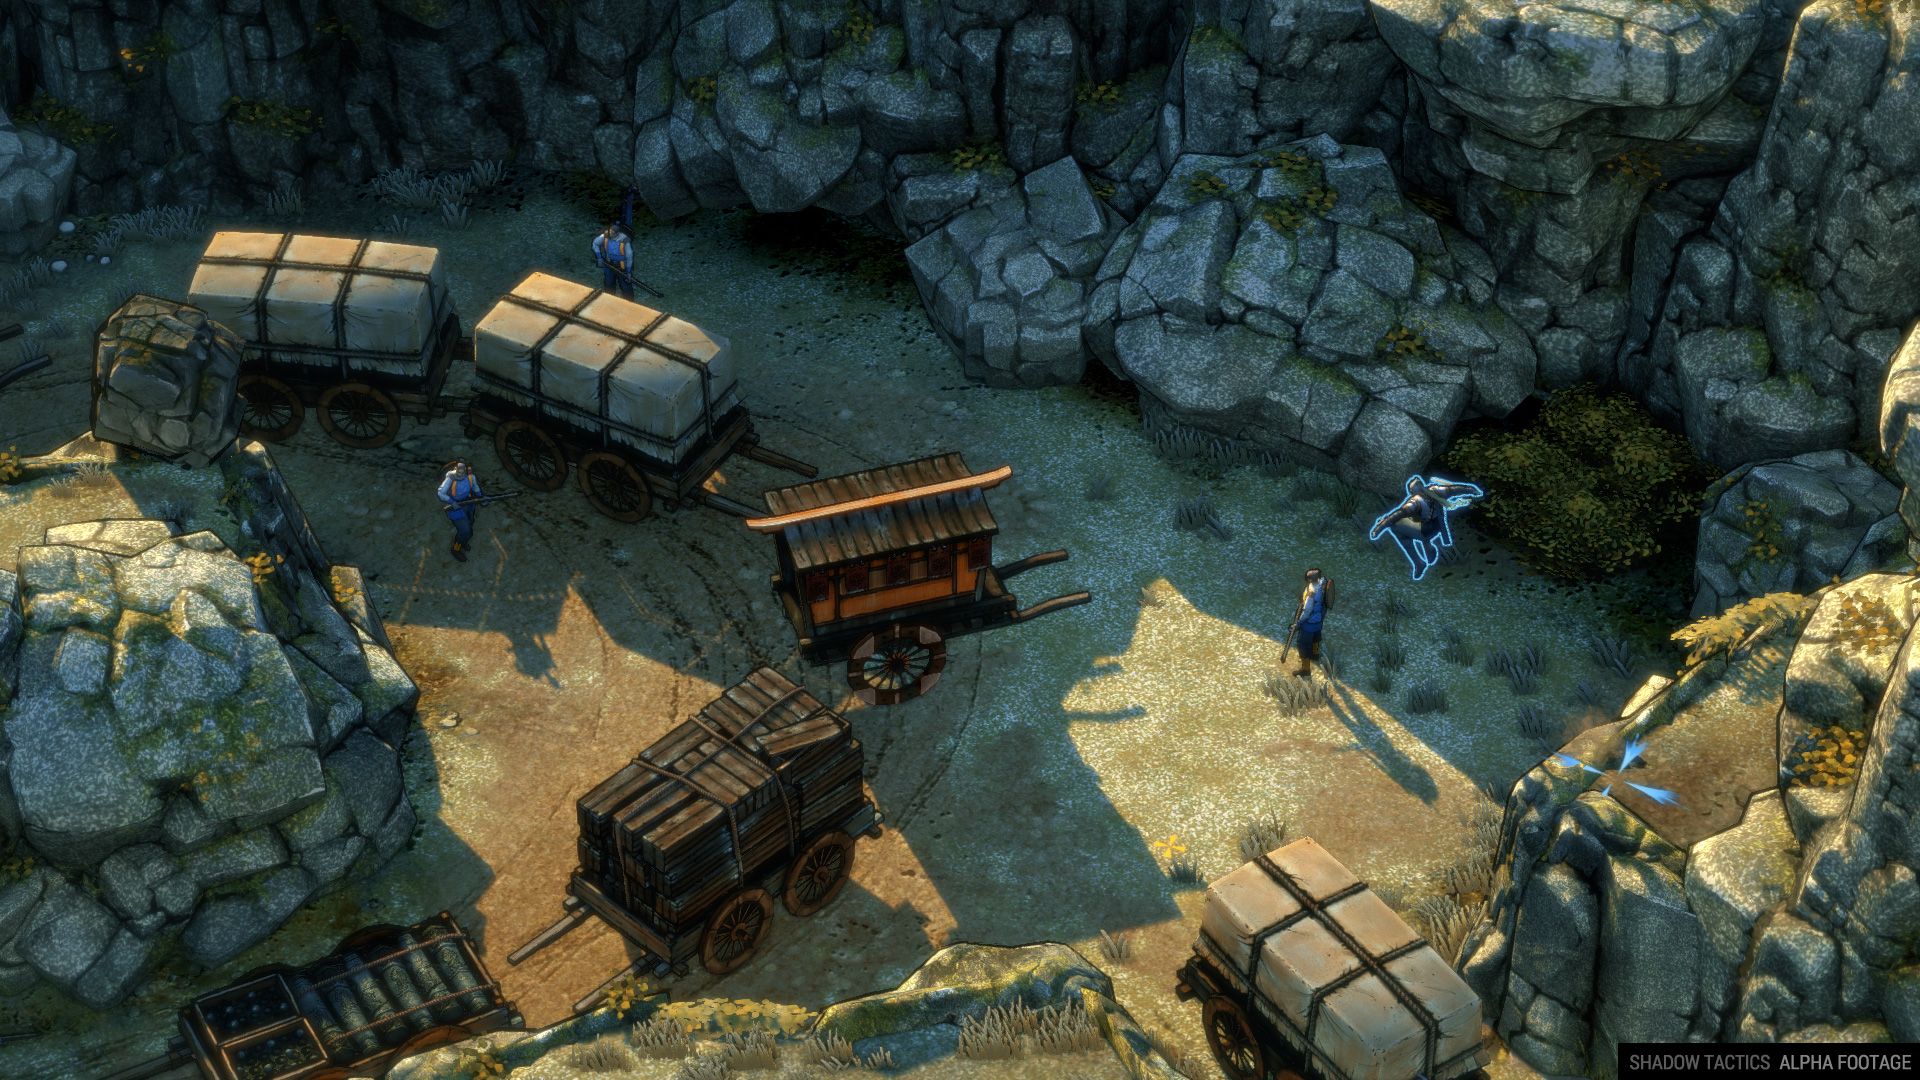 Deal Death From The Rooftops In Shadow Tactics: Blades Of The Shogun